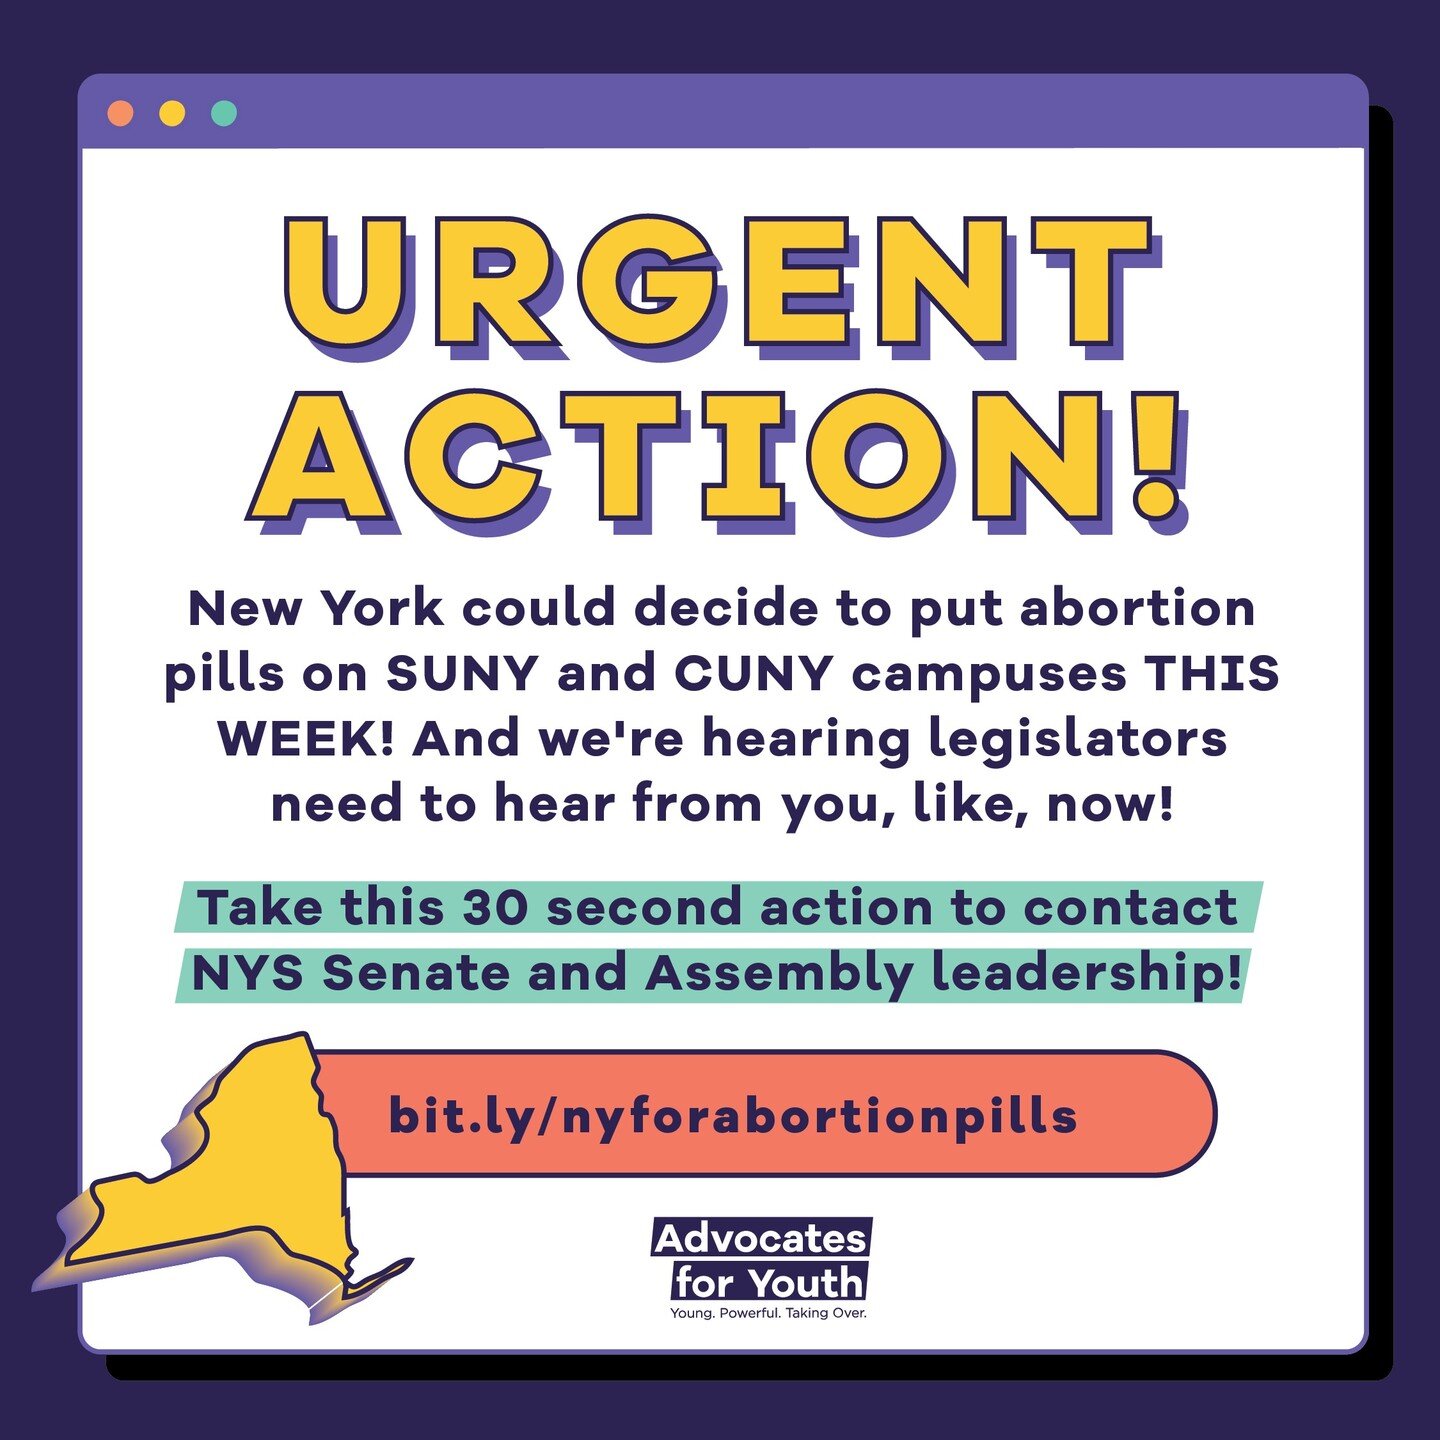 URGENT UPDATE!! Legislators are deciding THIS WEEK about whether to pass legislation for medication abortion on campus. RJC + Advocates for Youth are teaming up to call on EVERYONE to send a quick email and call up Senate and Assembly Leadership! 

W